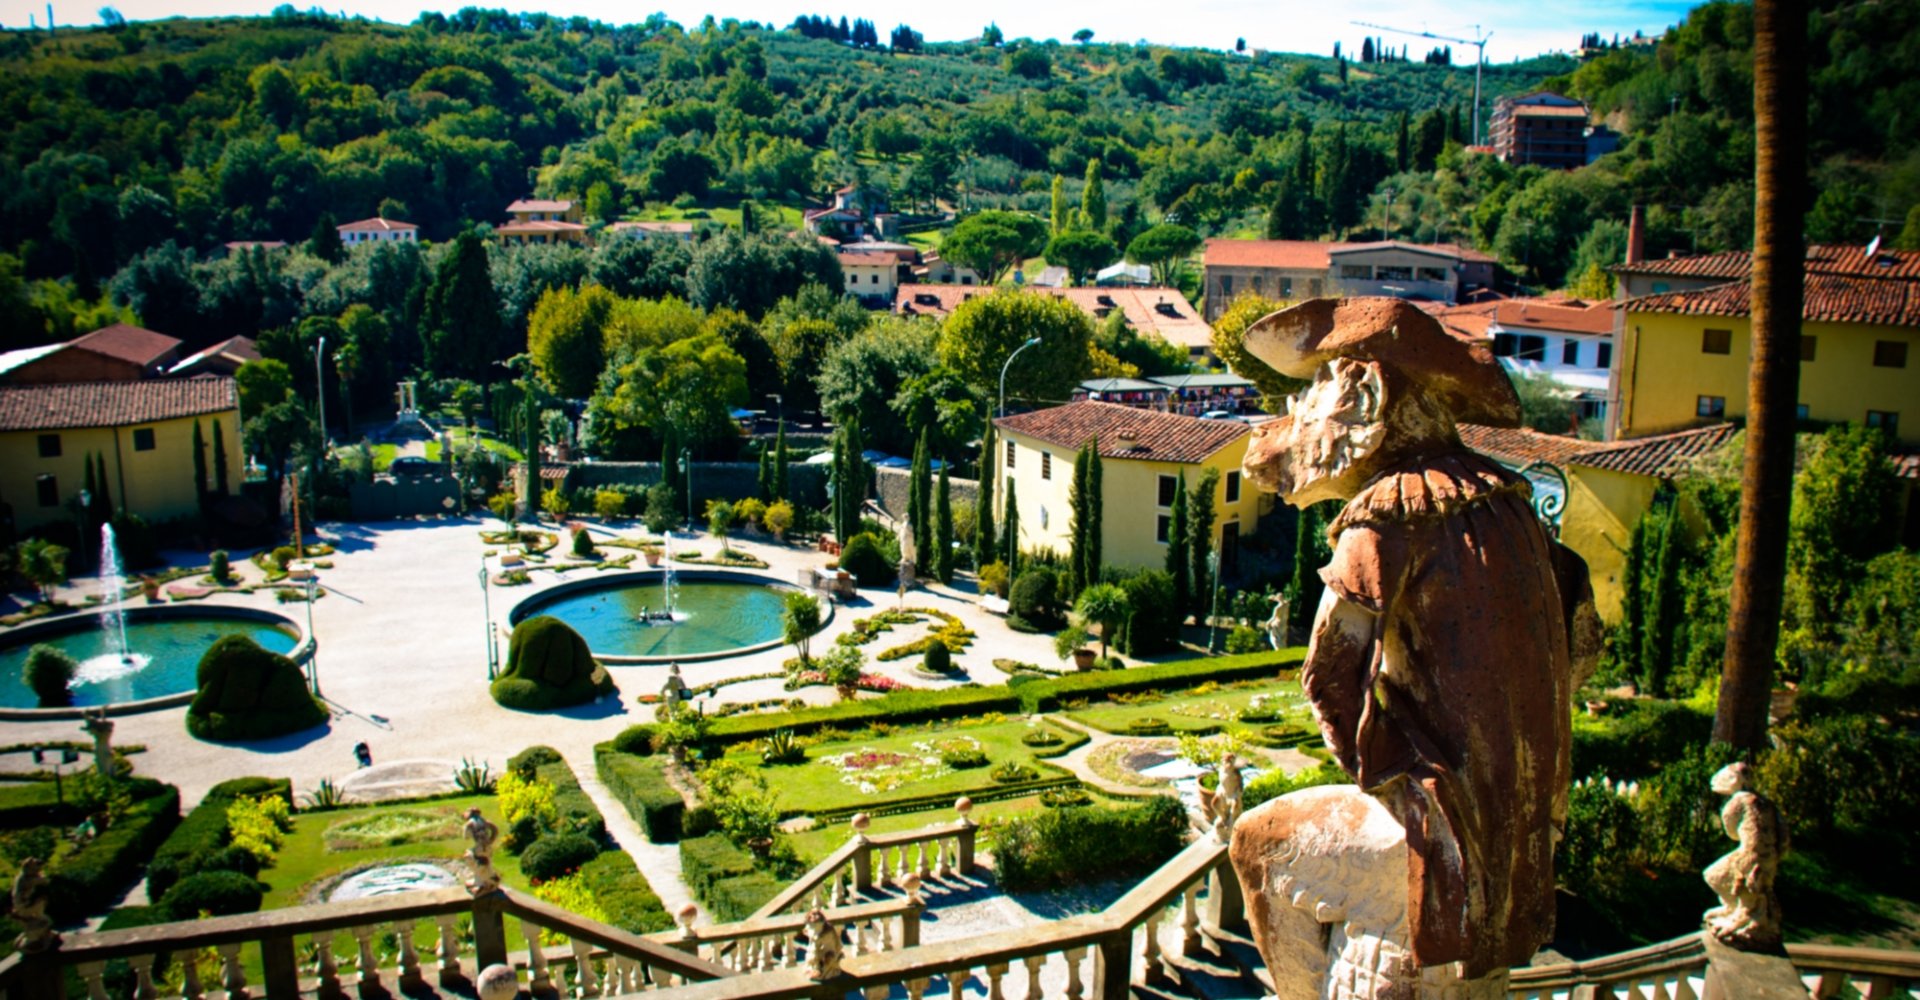 The view from the highest end of Villa Garzoni in Collodi